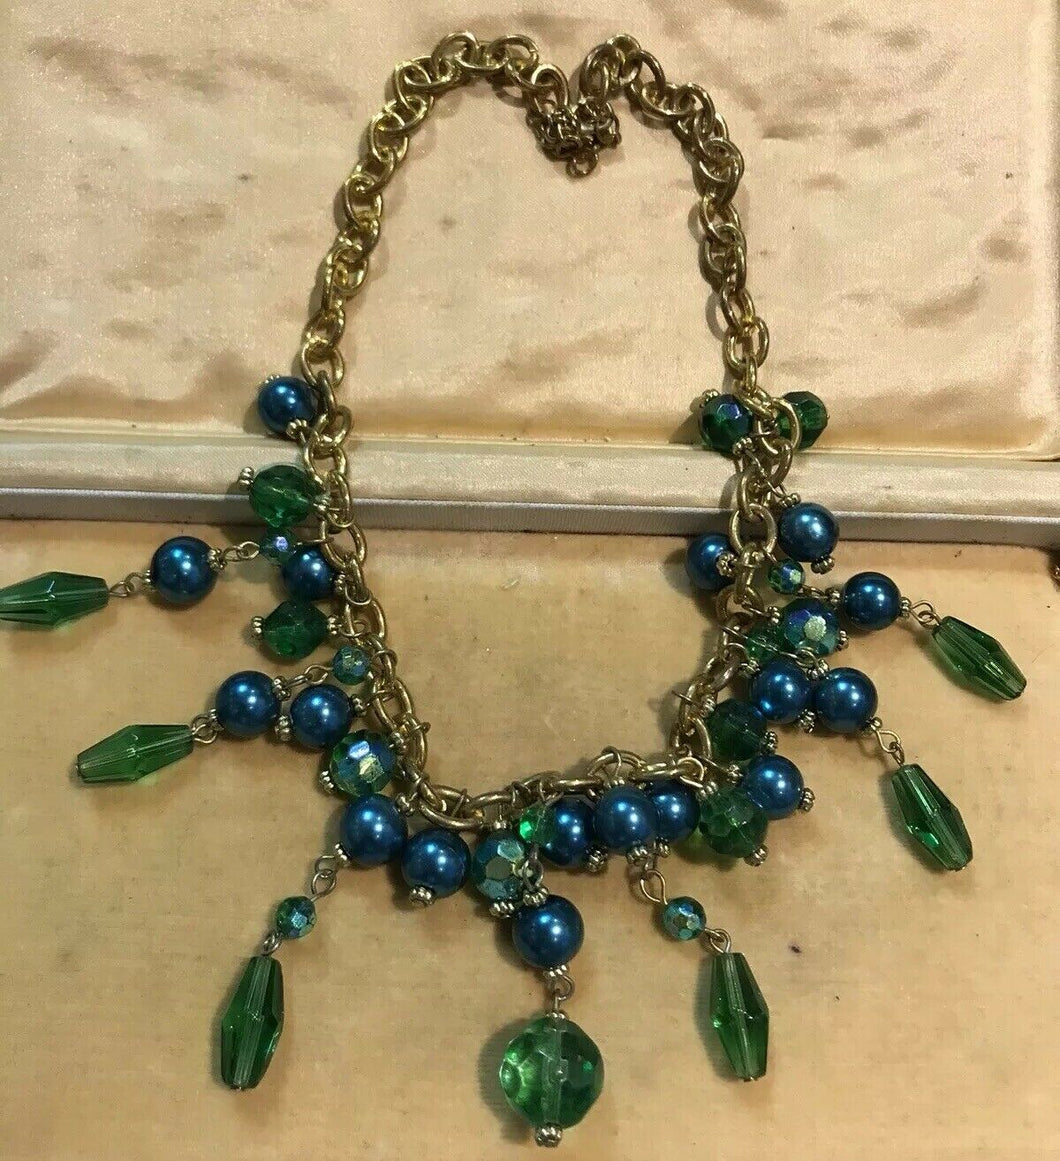 Vintage Gold Tone Chain Green Beaded Necklace